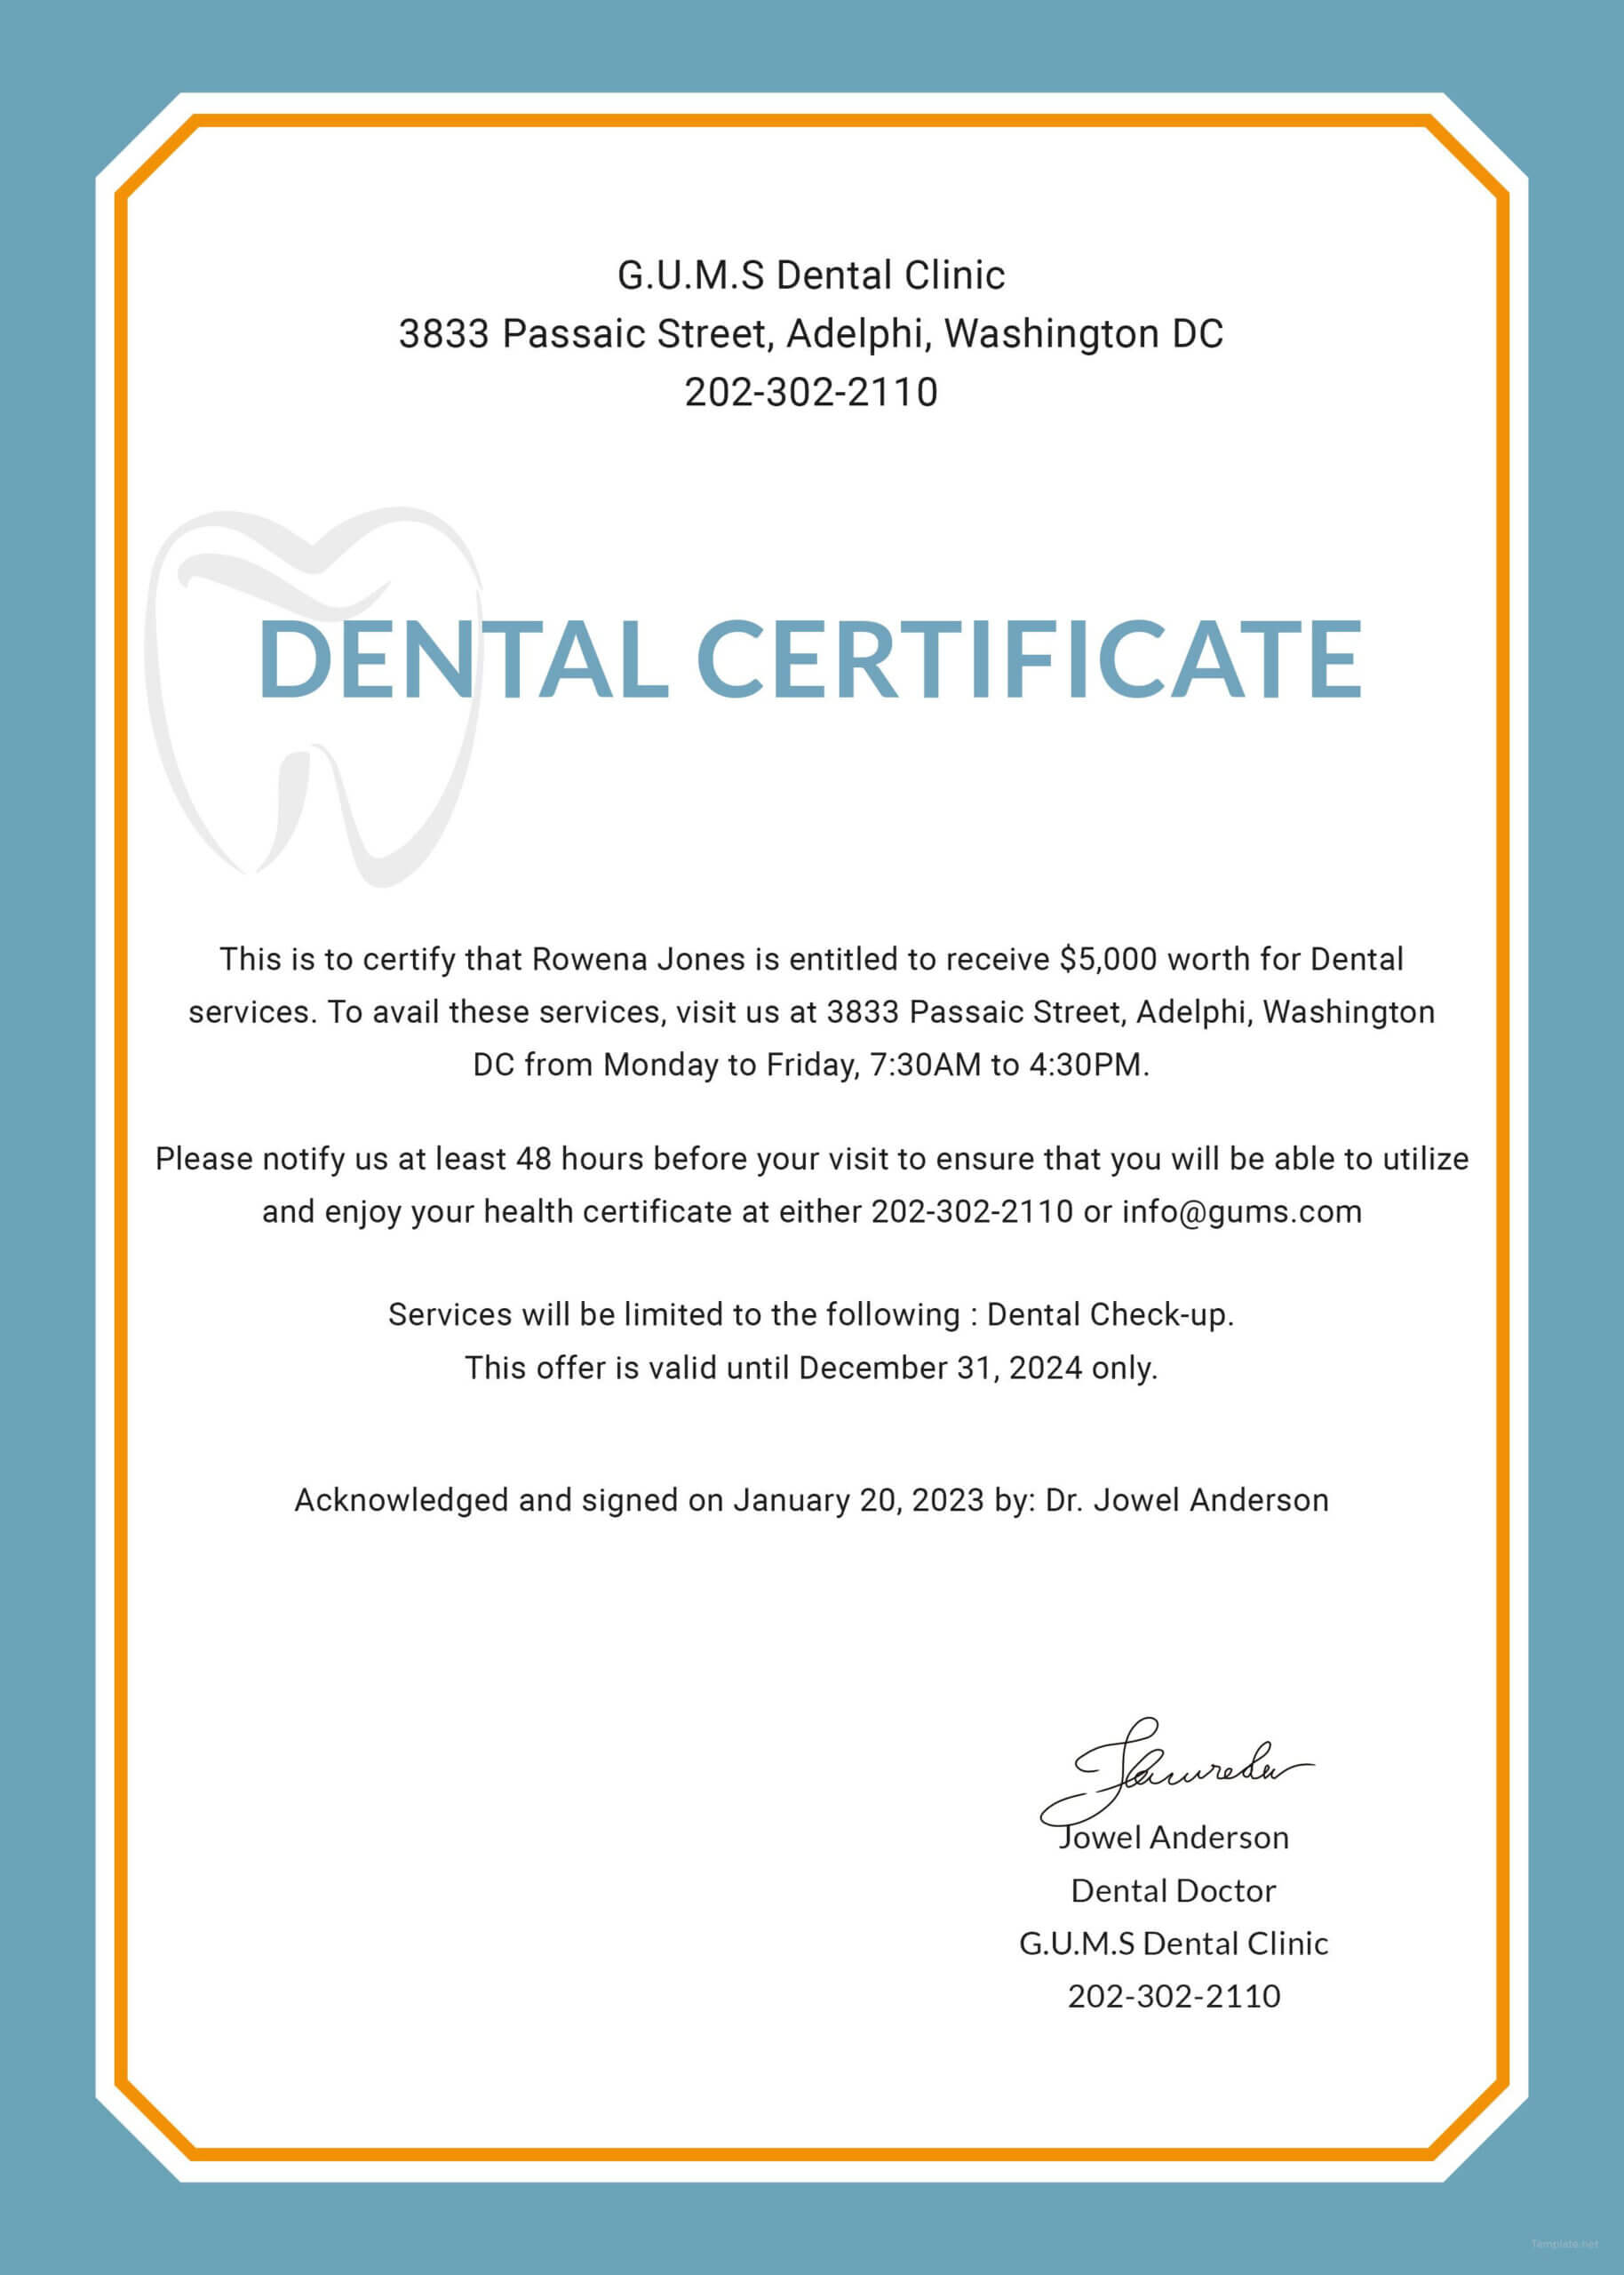 Free Dental Medical Certificate Sample | Free Dental Throughout No Certificate Templates Could Be Found